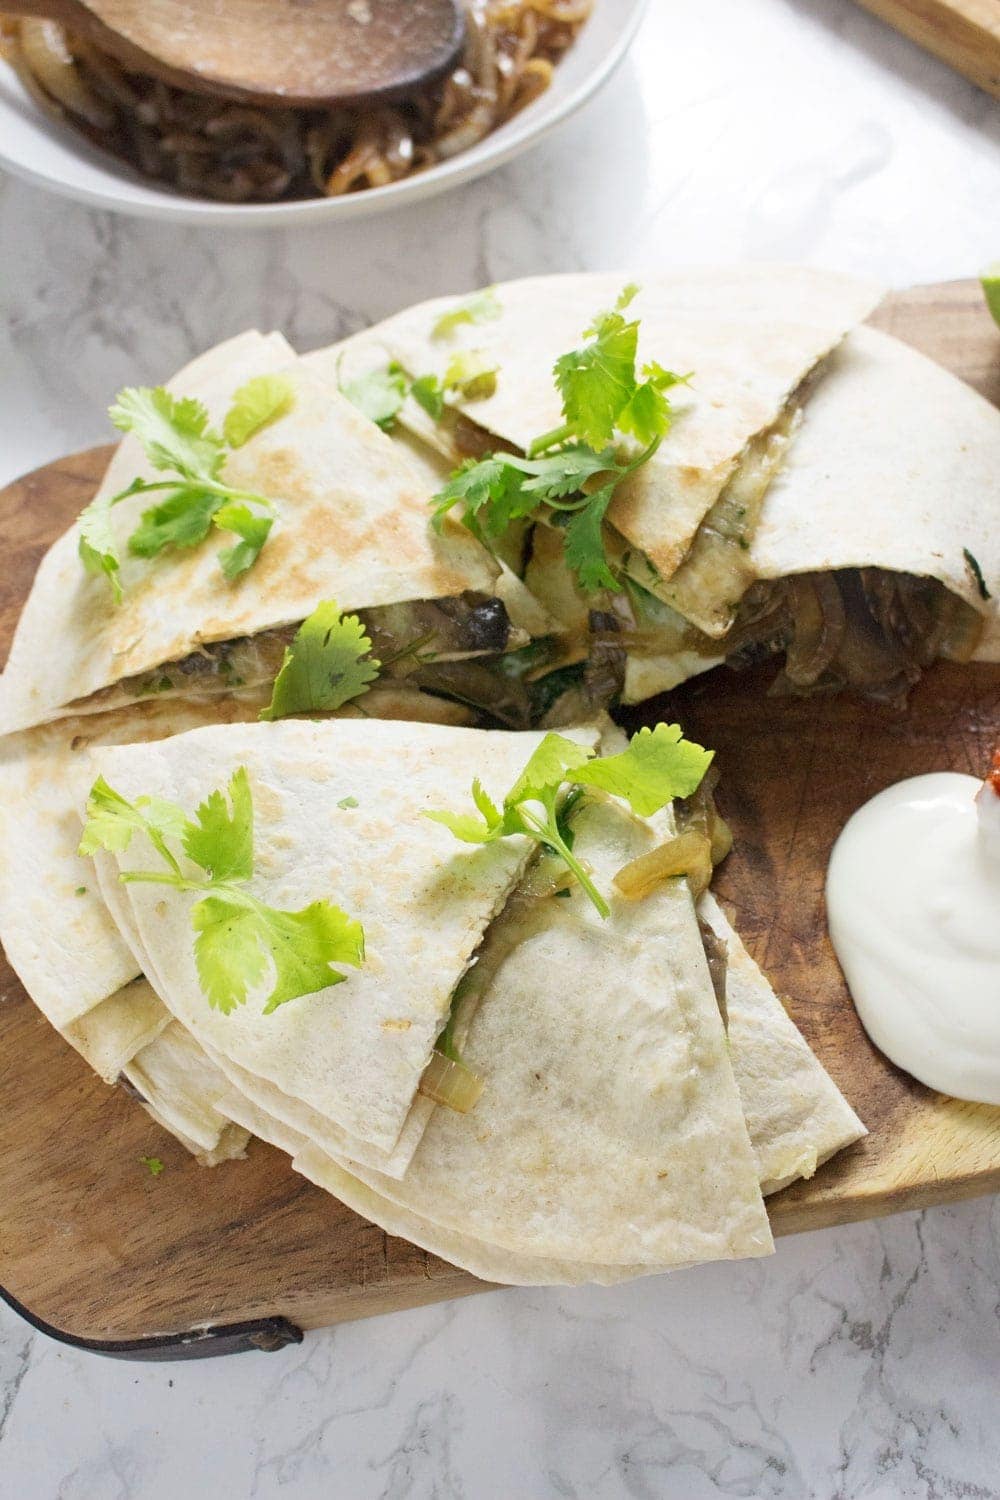 These portobello & caramelised onion quesadillas are the perfect vegetarian dinner when you're craving something full of Mexican flavour!